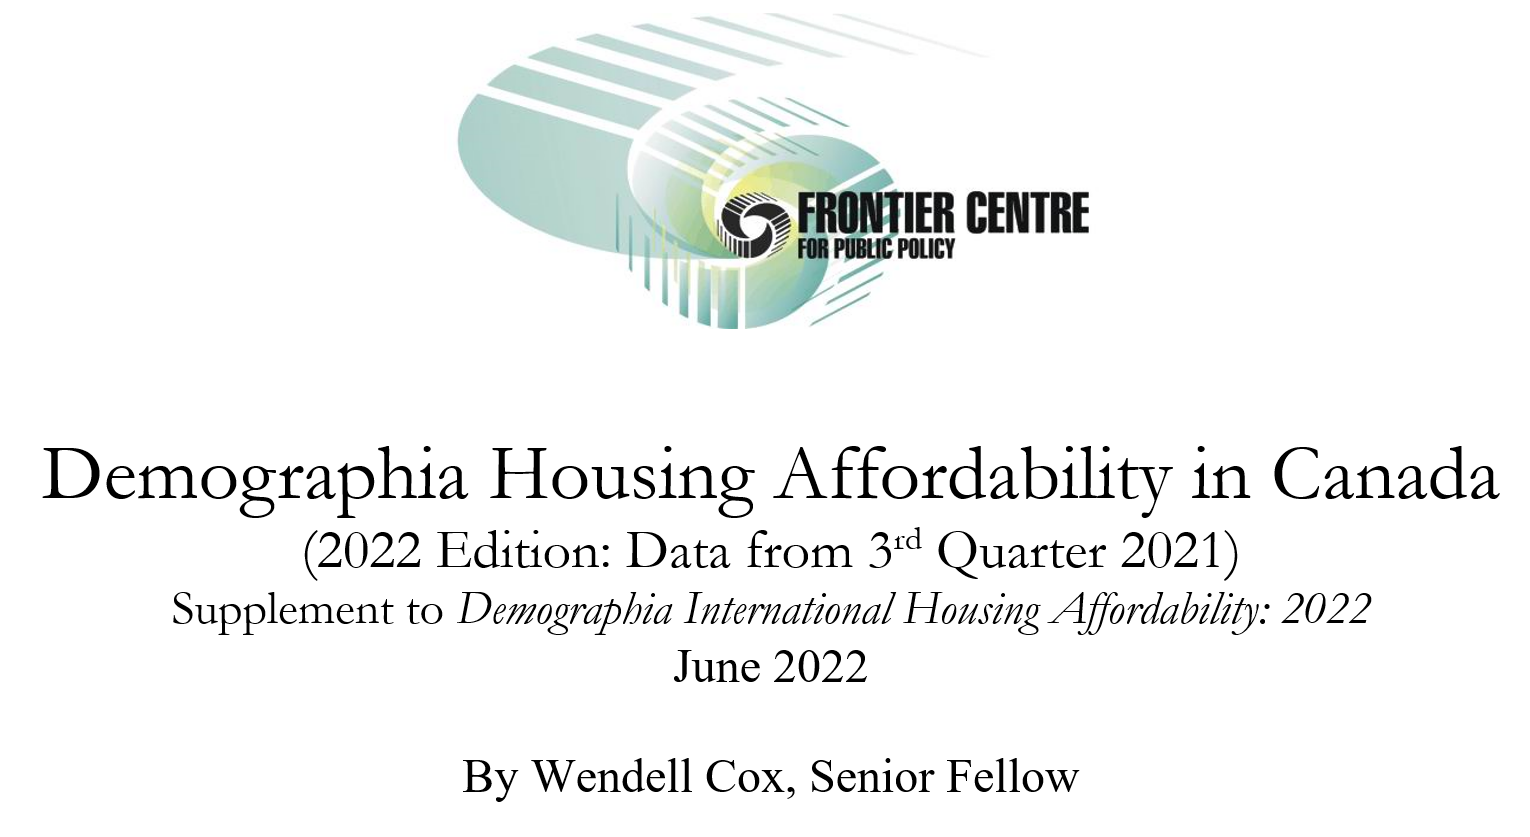 MEDIA RELEASE – Housing Markets in 25 of 46 Canadian Cities Now Unaffordable